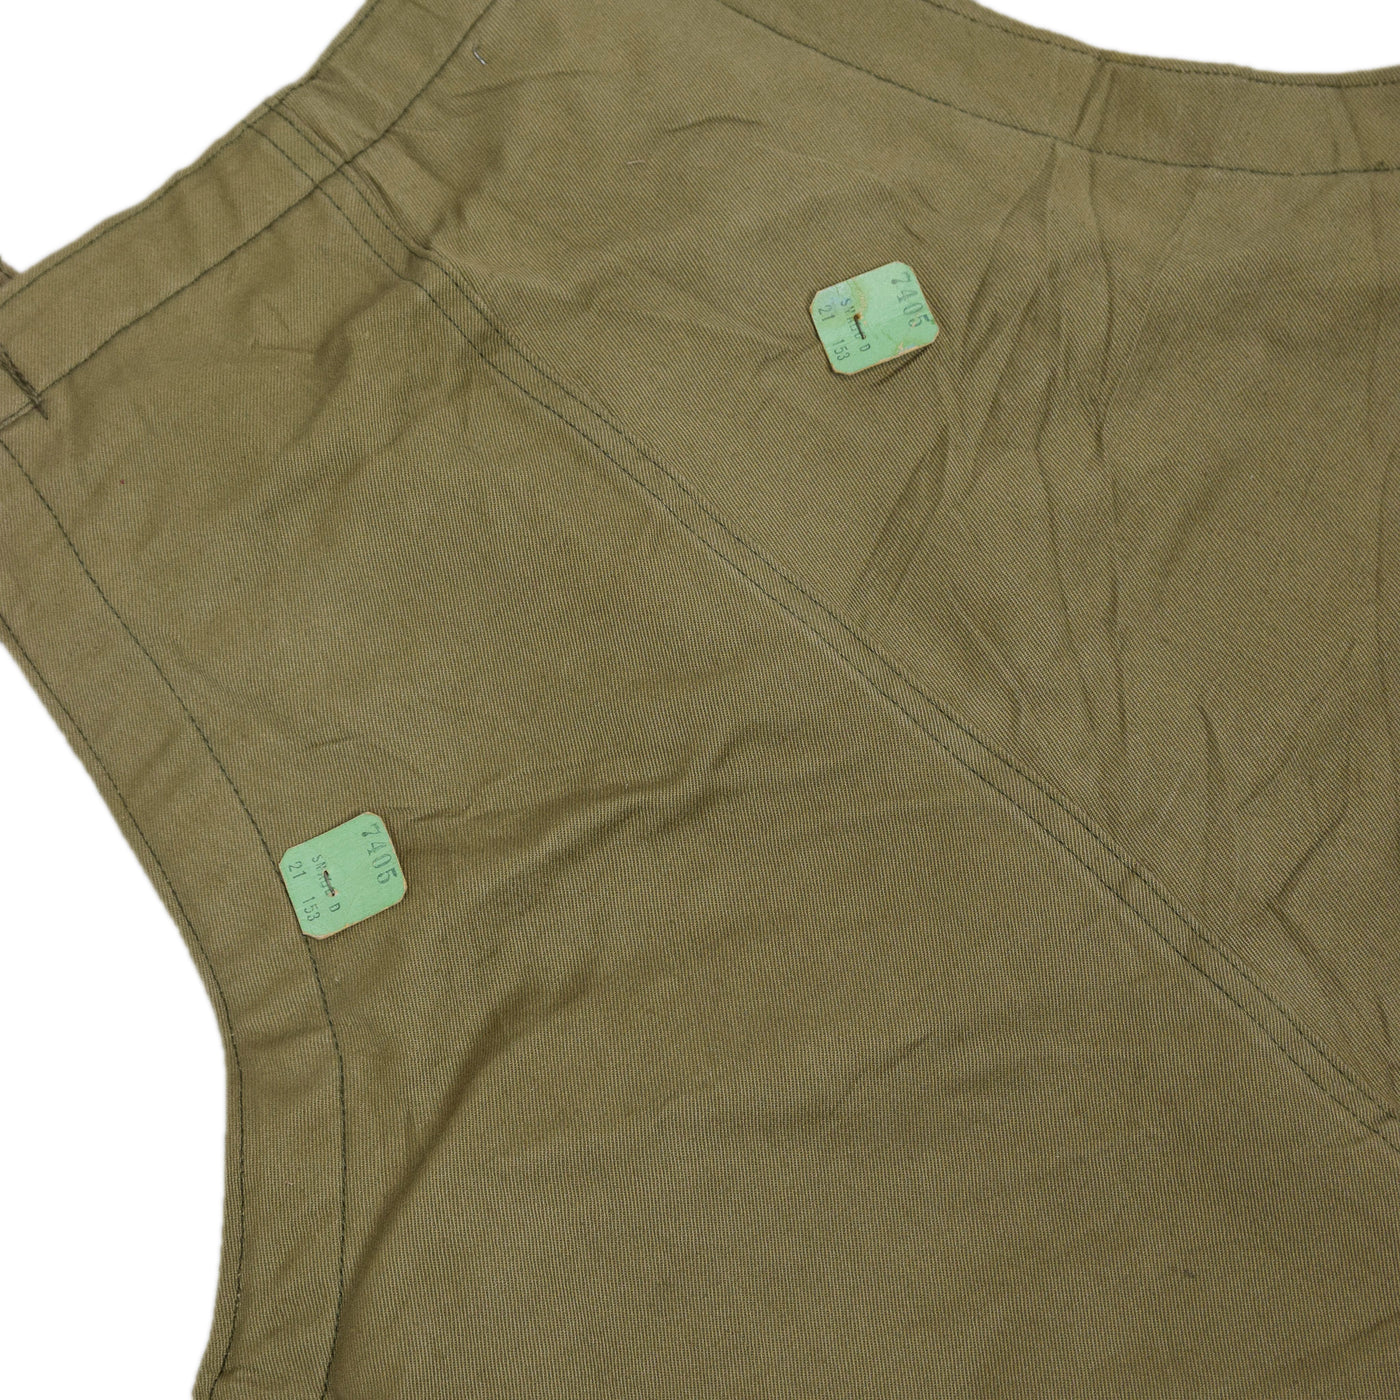 Deadstock WWII Era US Army Wool Tanker Dungaree Military Coveralls S back detail